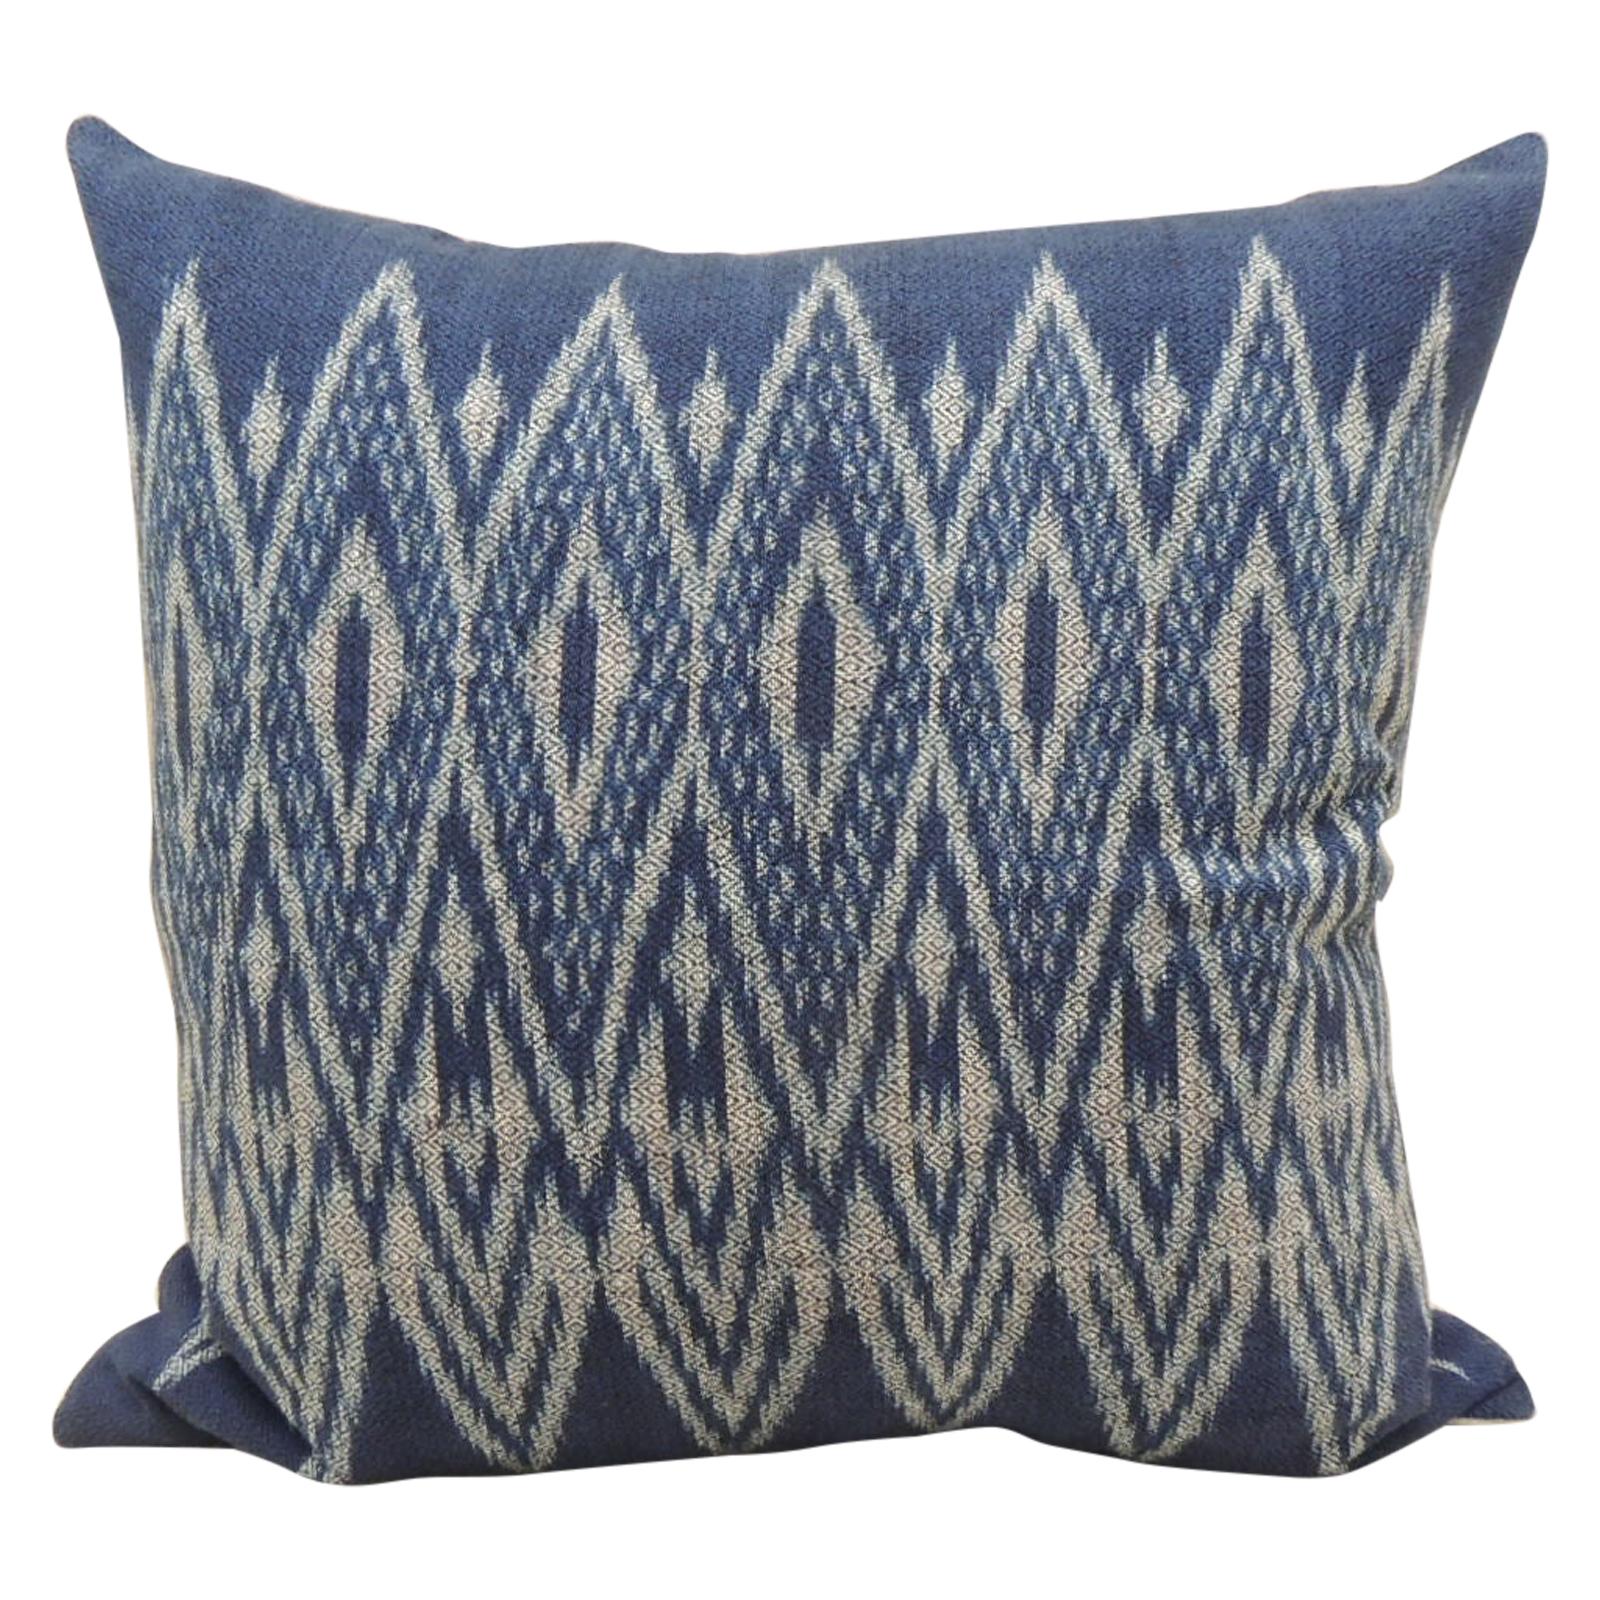 Vintage Woven Blue and White Ikat Decorative Square Pillow